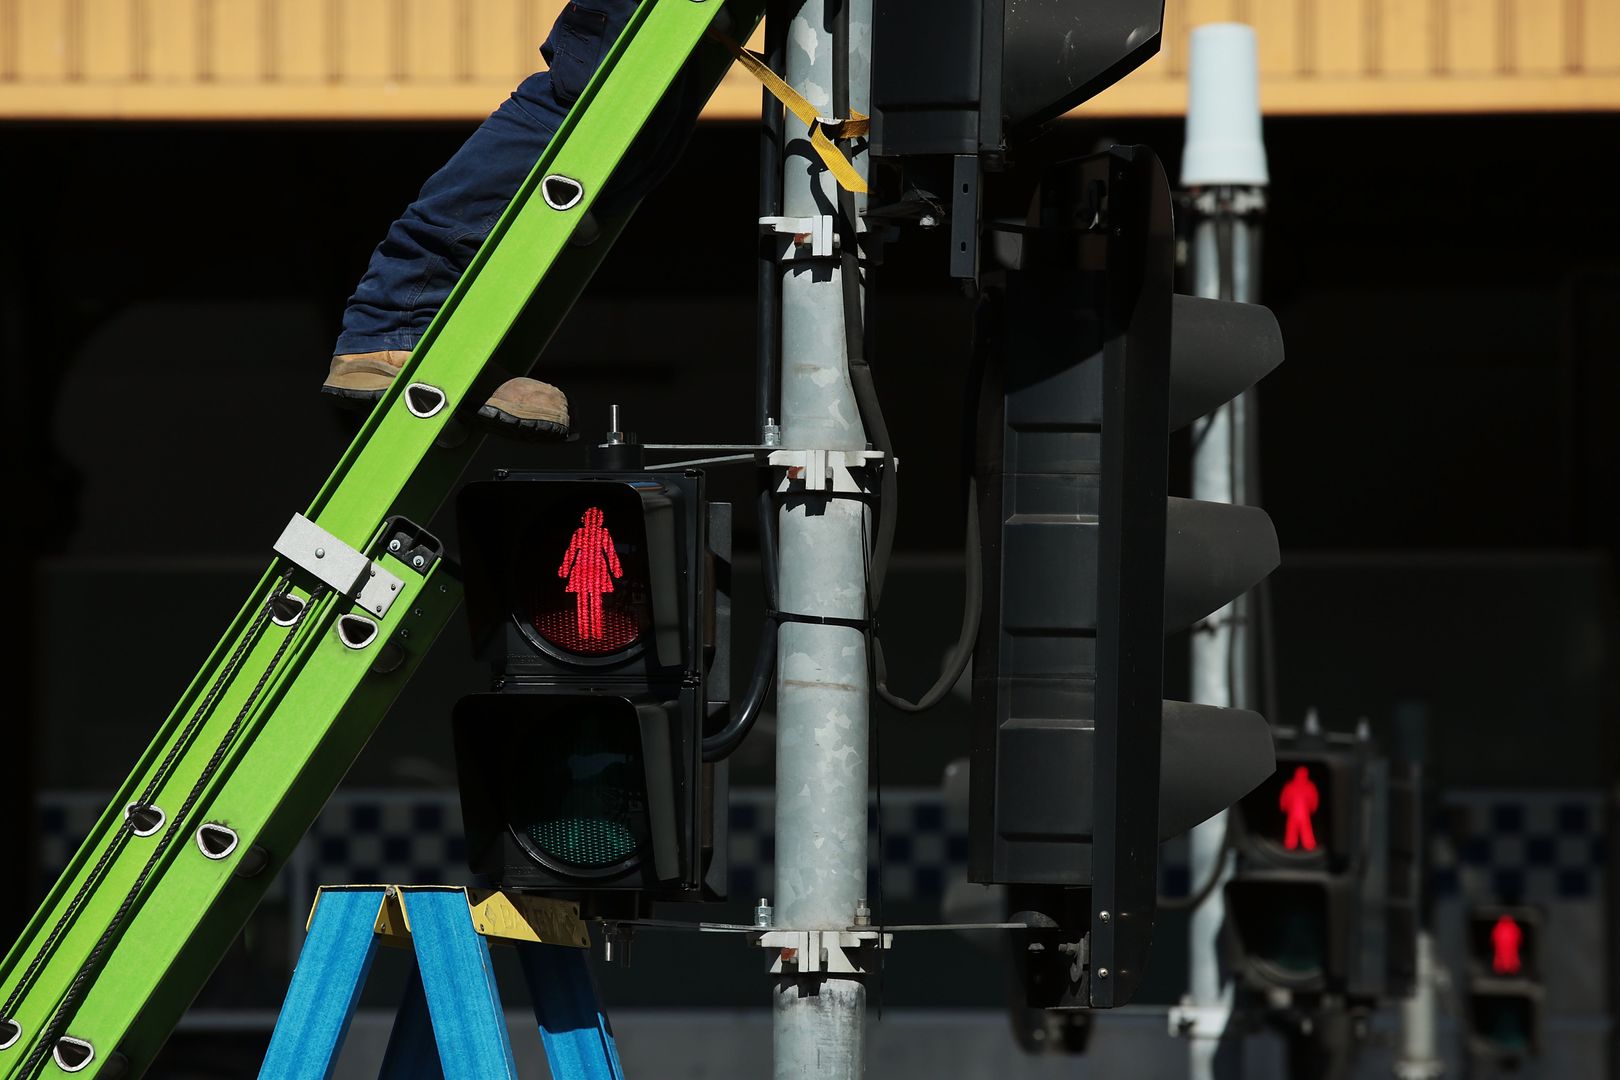 Female traffic light signals are installed at the intersection of Swanston and Flinders streets on March 7, 2017 in Melbourne, Australia. Ten female pedestrian crossing signals are being installed as part of a 12-month trial in an aim to address unconscious gender bias. The Committee for Melbourne, a non-profit organisation comprising more than 120 Melbourne business and community groups, is behind the move.